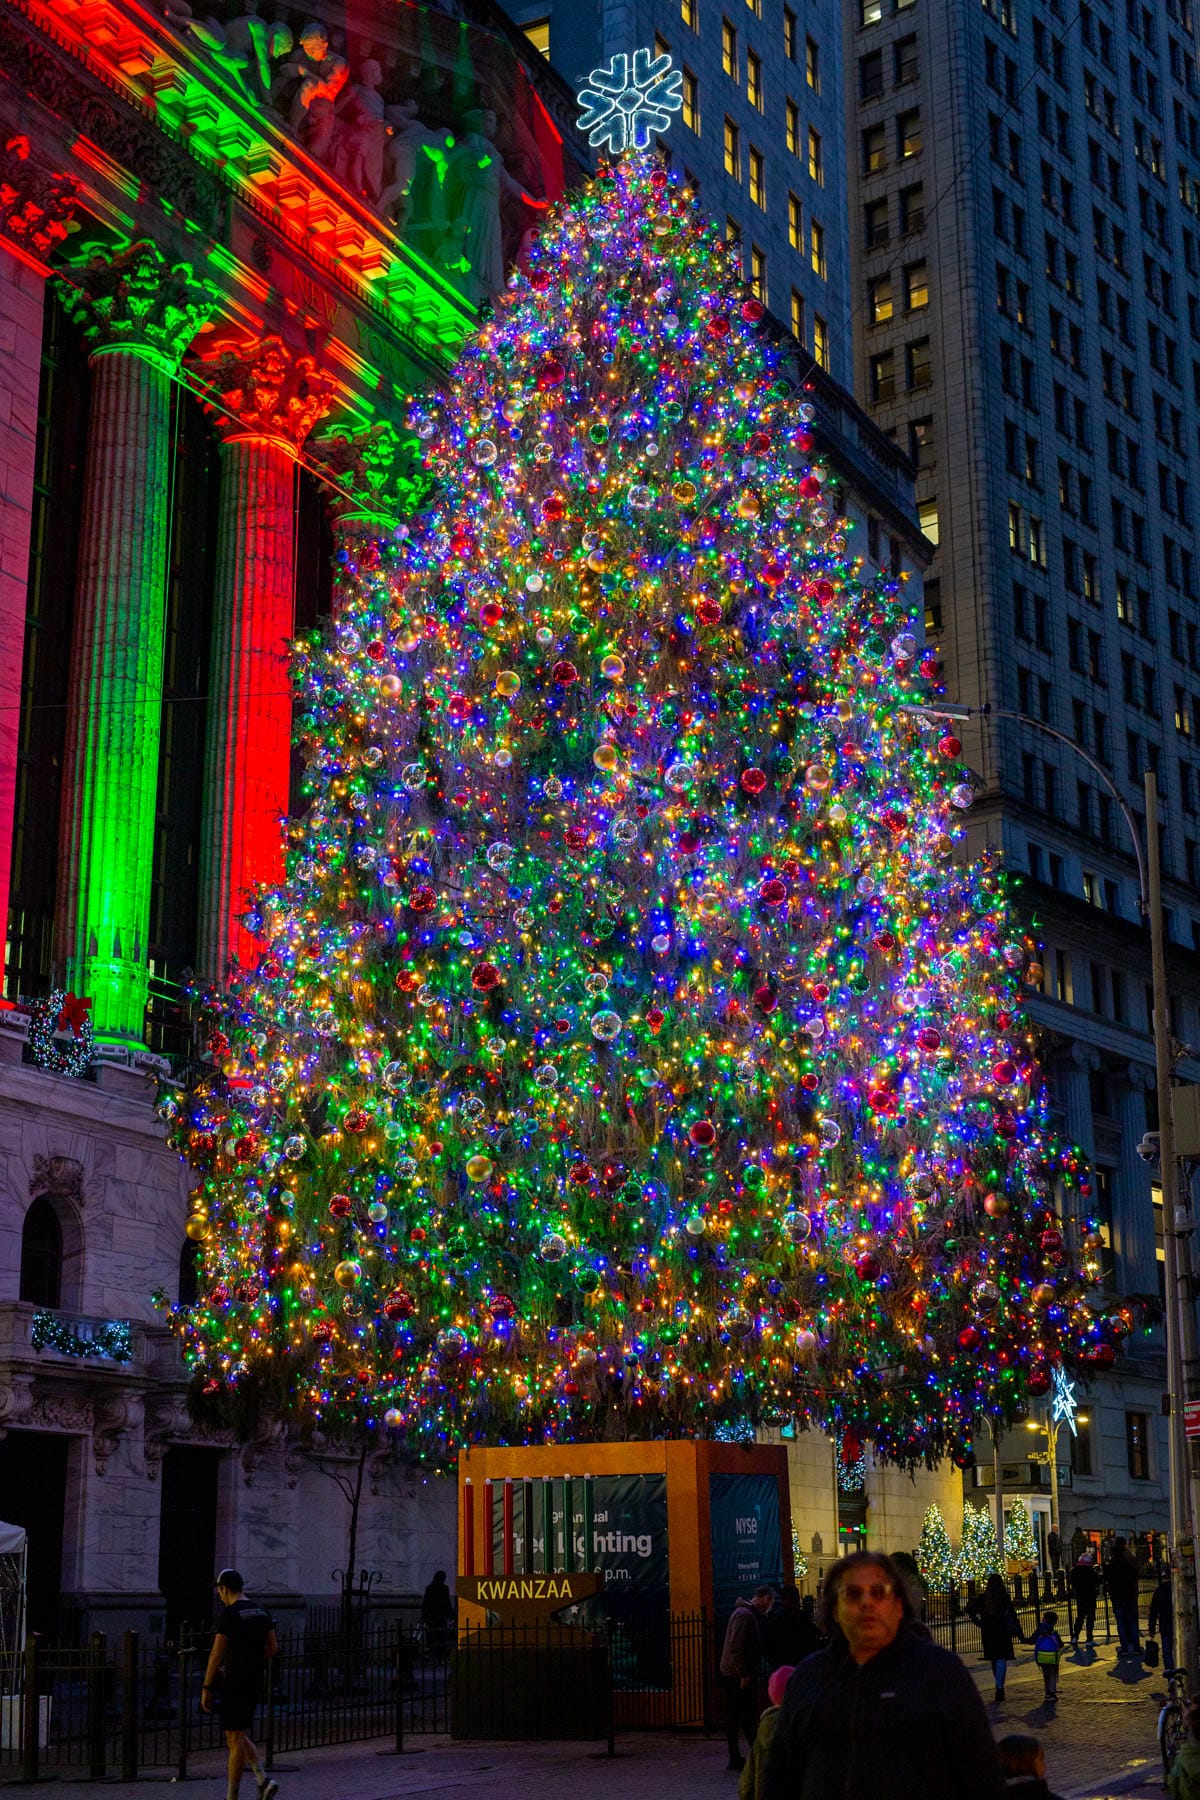 Wall Street Christmas Trees Best in New York City
free things to do during Christmas in New York City